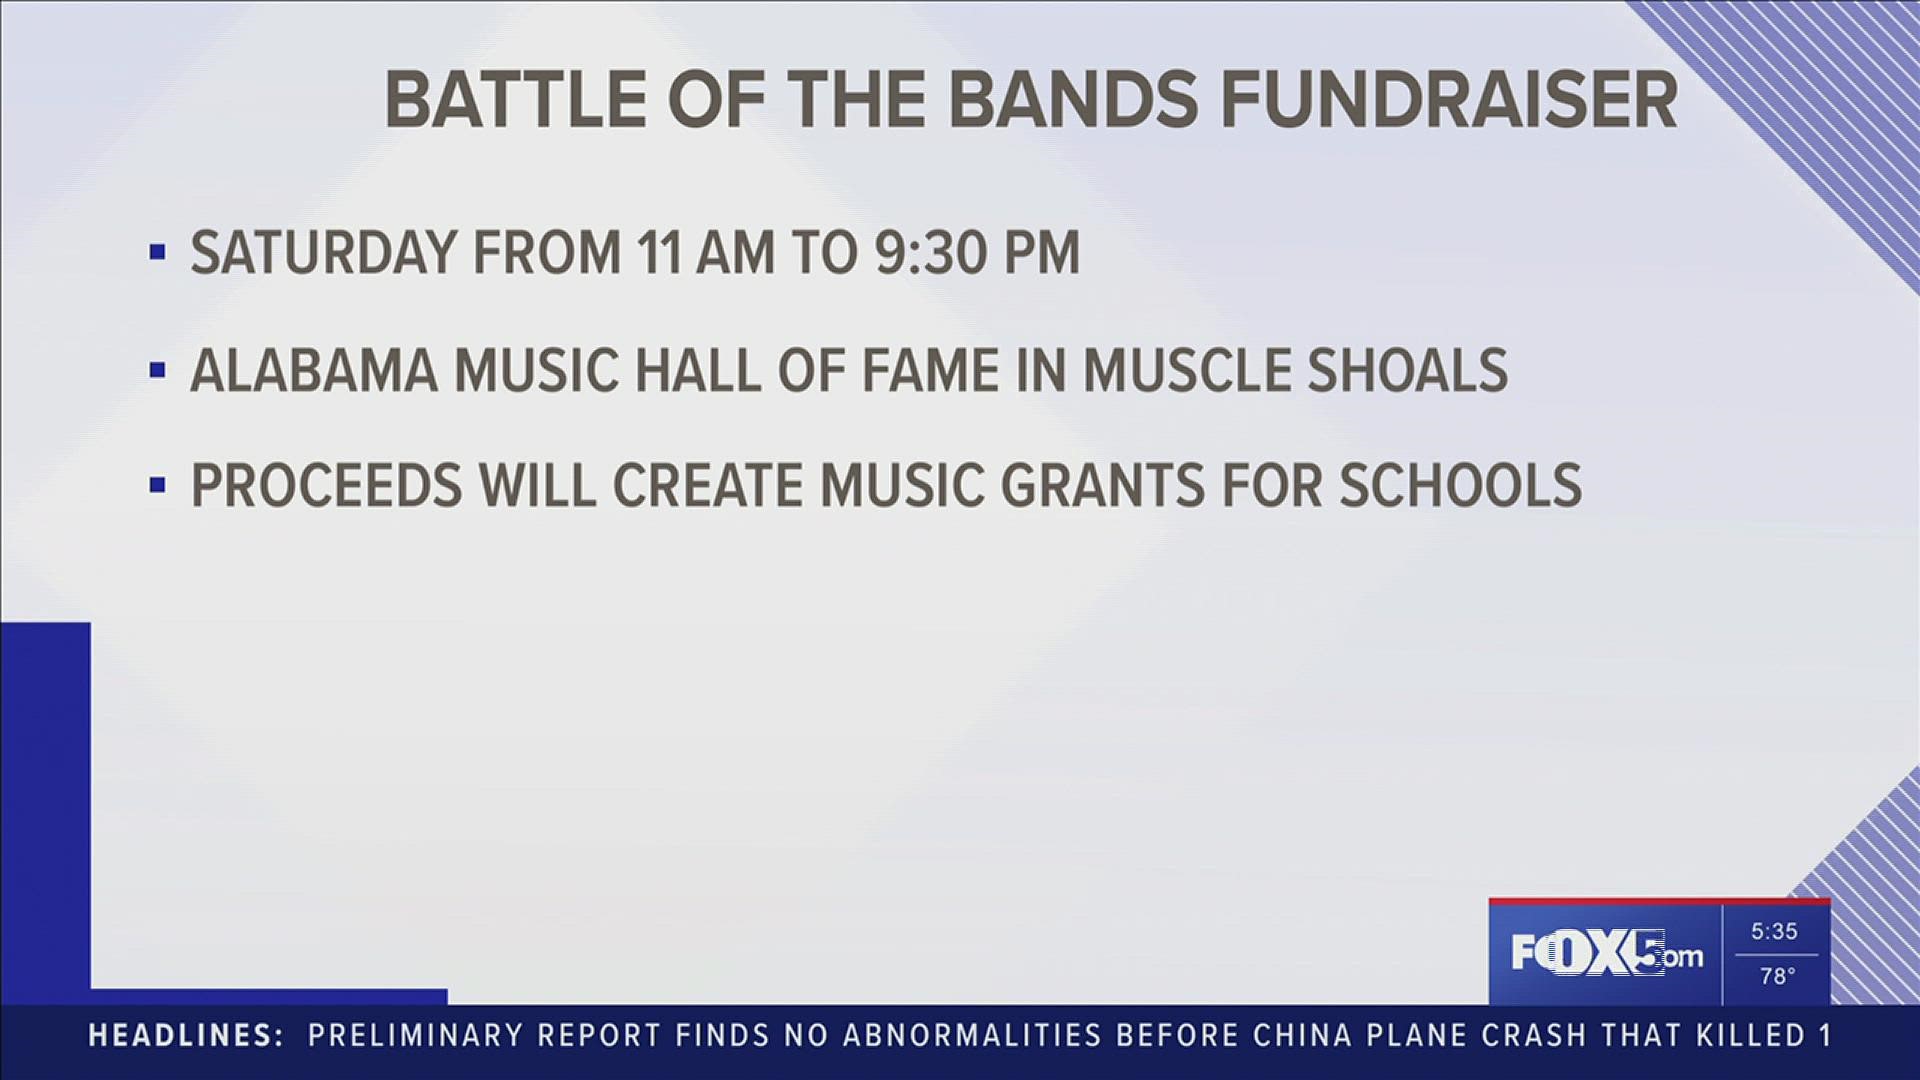 The AMIEA, in partnership with Big River Broadcasting and the Florence Academy of Fine Arts, is hosting a Battle of the Bands on April 23, 2022, from 11 a.m. until 9